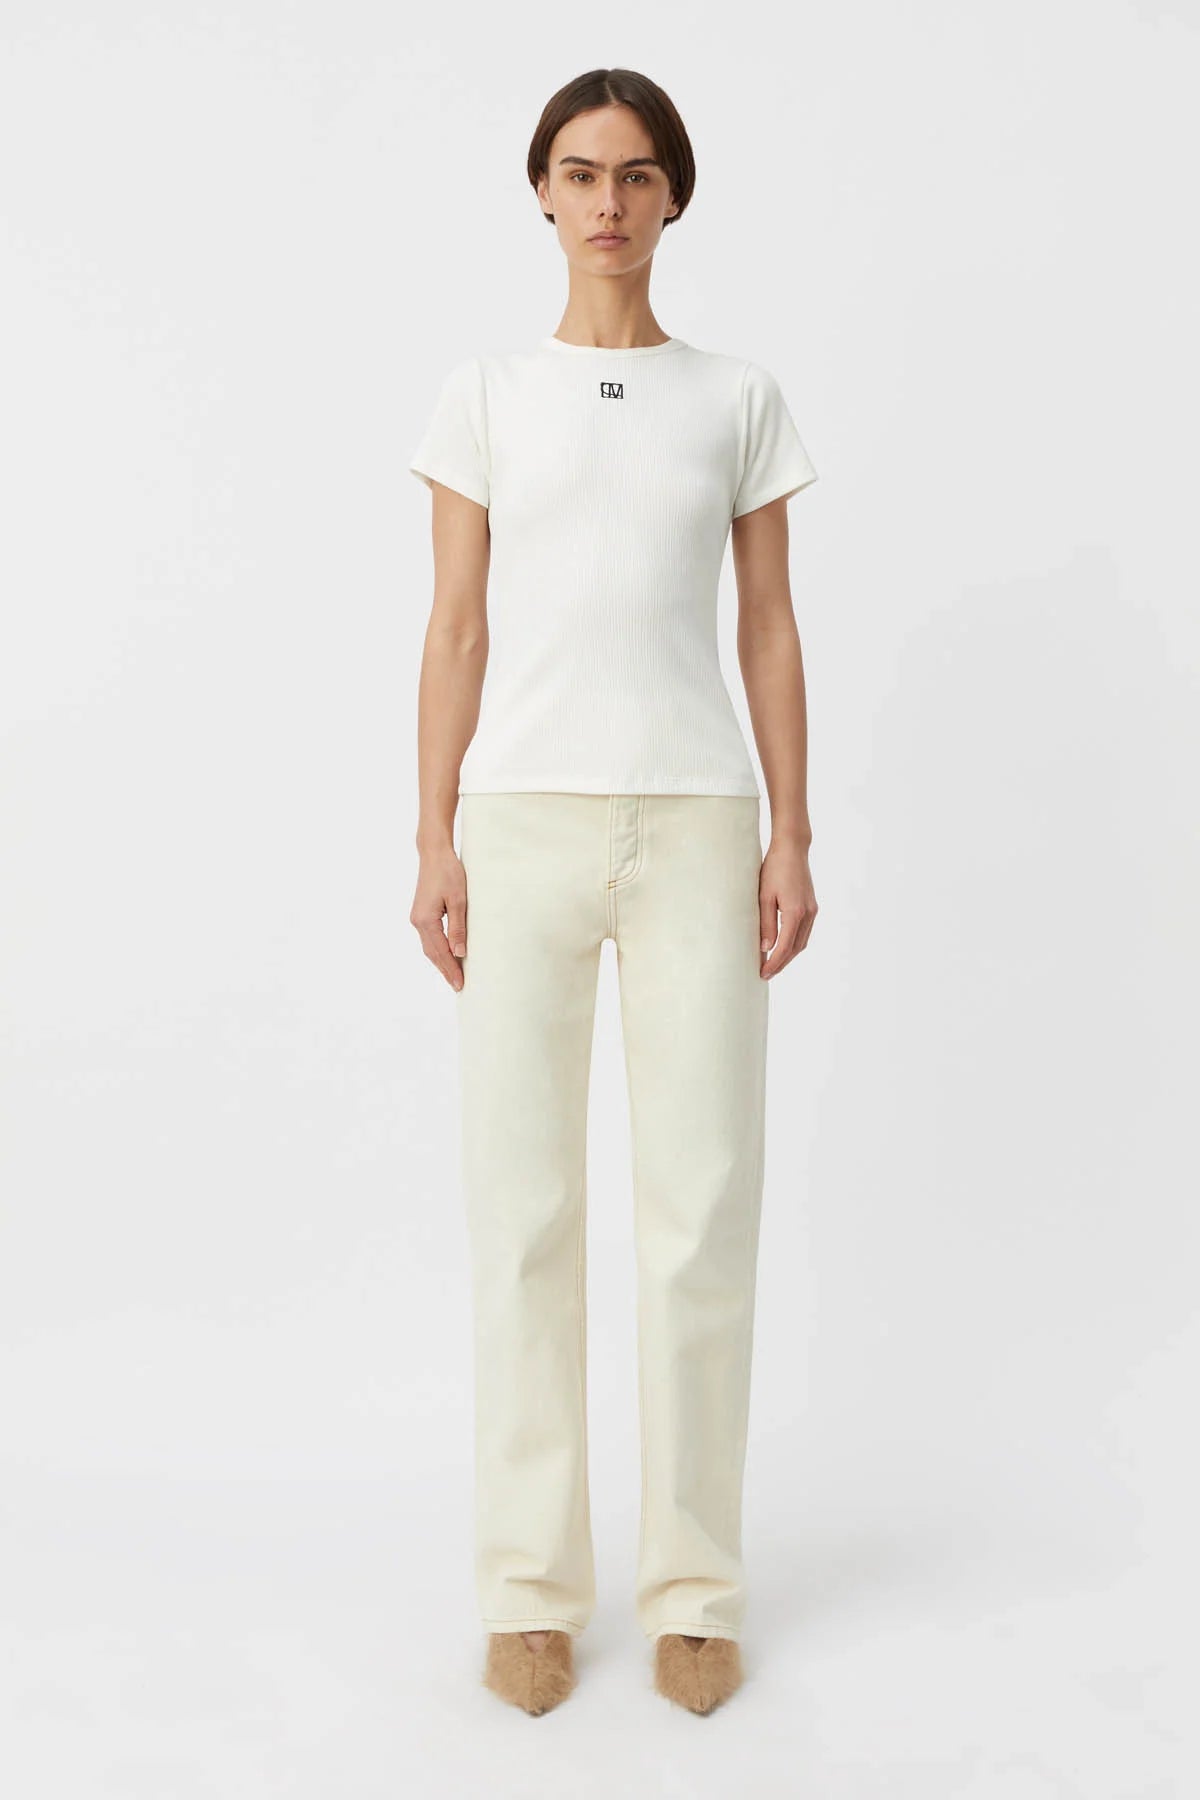 C&M Camilla & Marc Nora Fitted Tee | Soft White